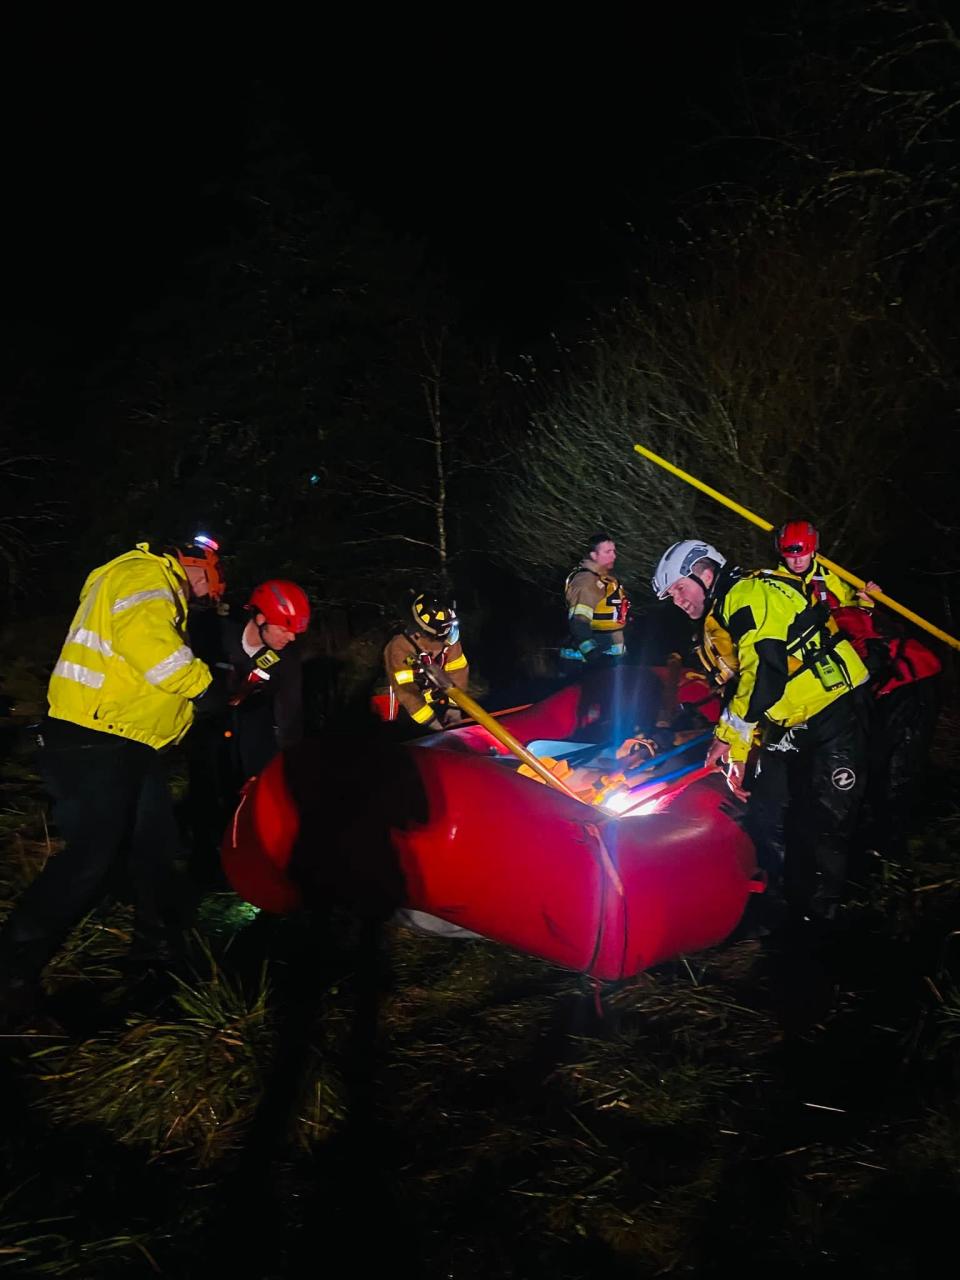 Maury County Fire, Franklin Fire Swift Water Rescue team, Columbia Fire & Rescue and Spring Hill Fire Department combined resources to rescue two individuals trapped in a car in Little Flat Creek.